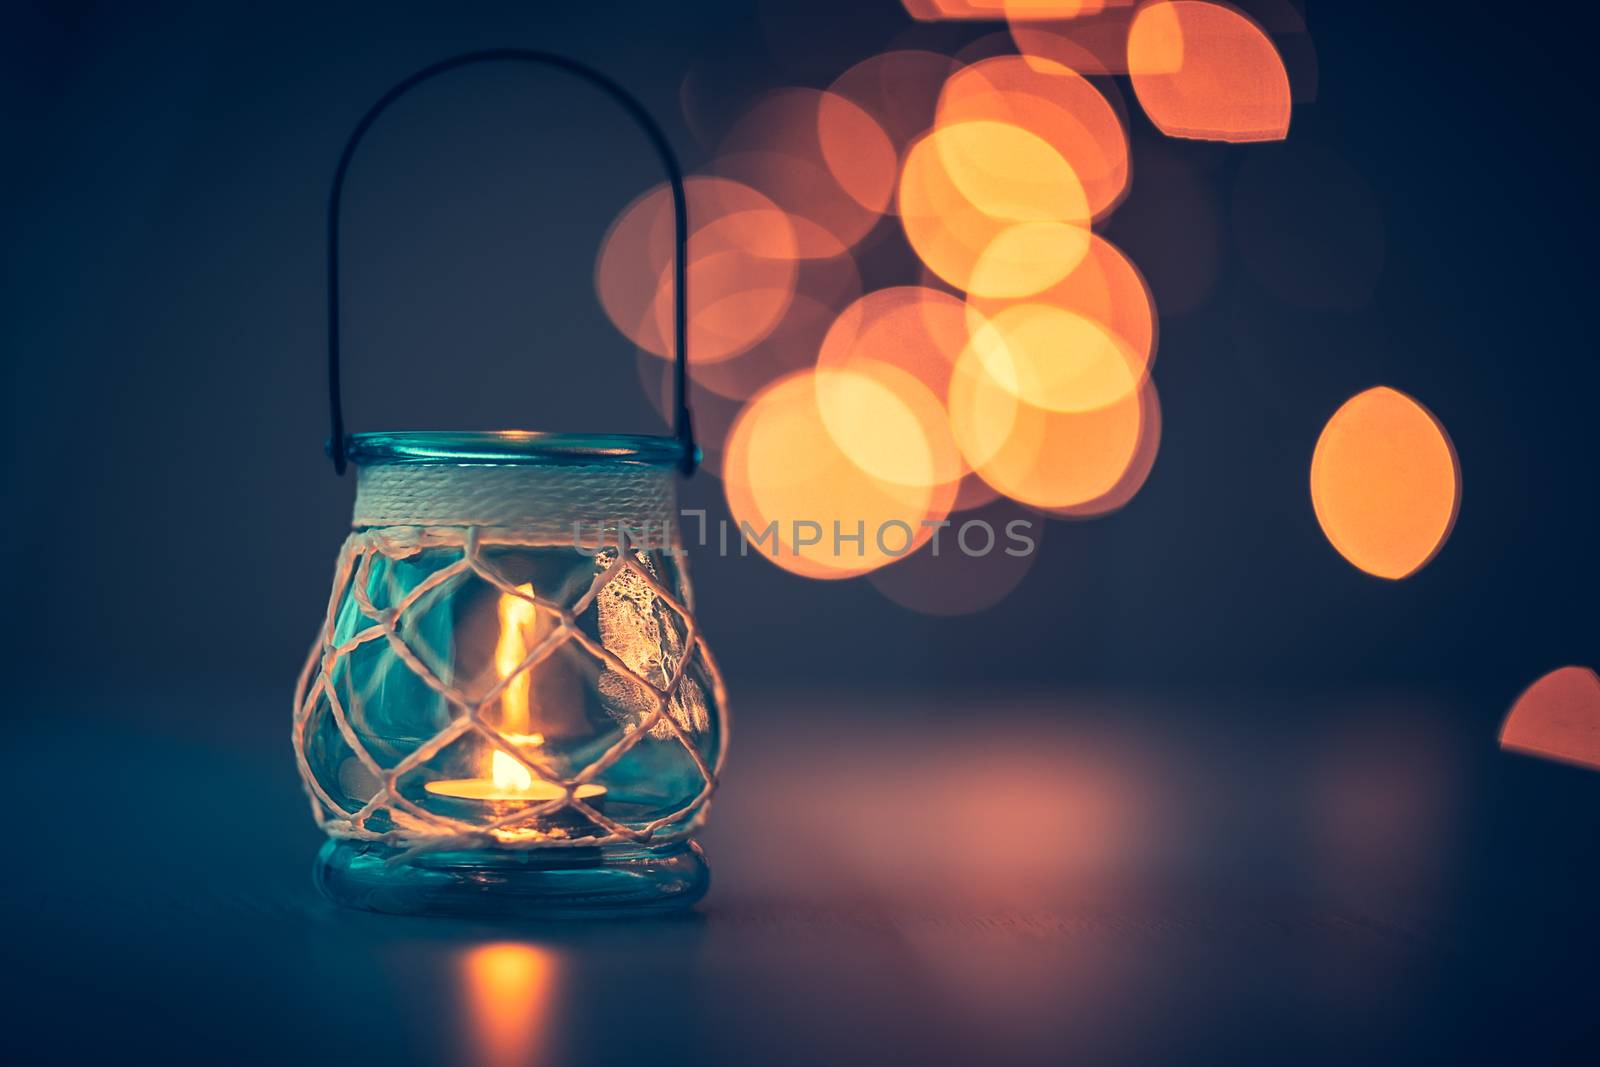 Romantic candlelight atmosphere by Anna_Omelchenko